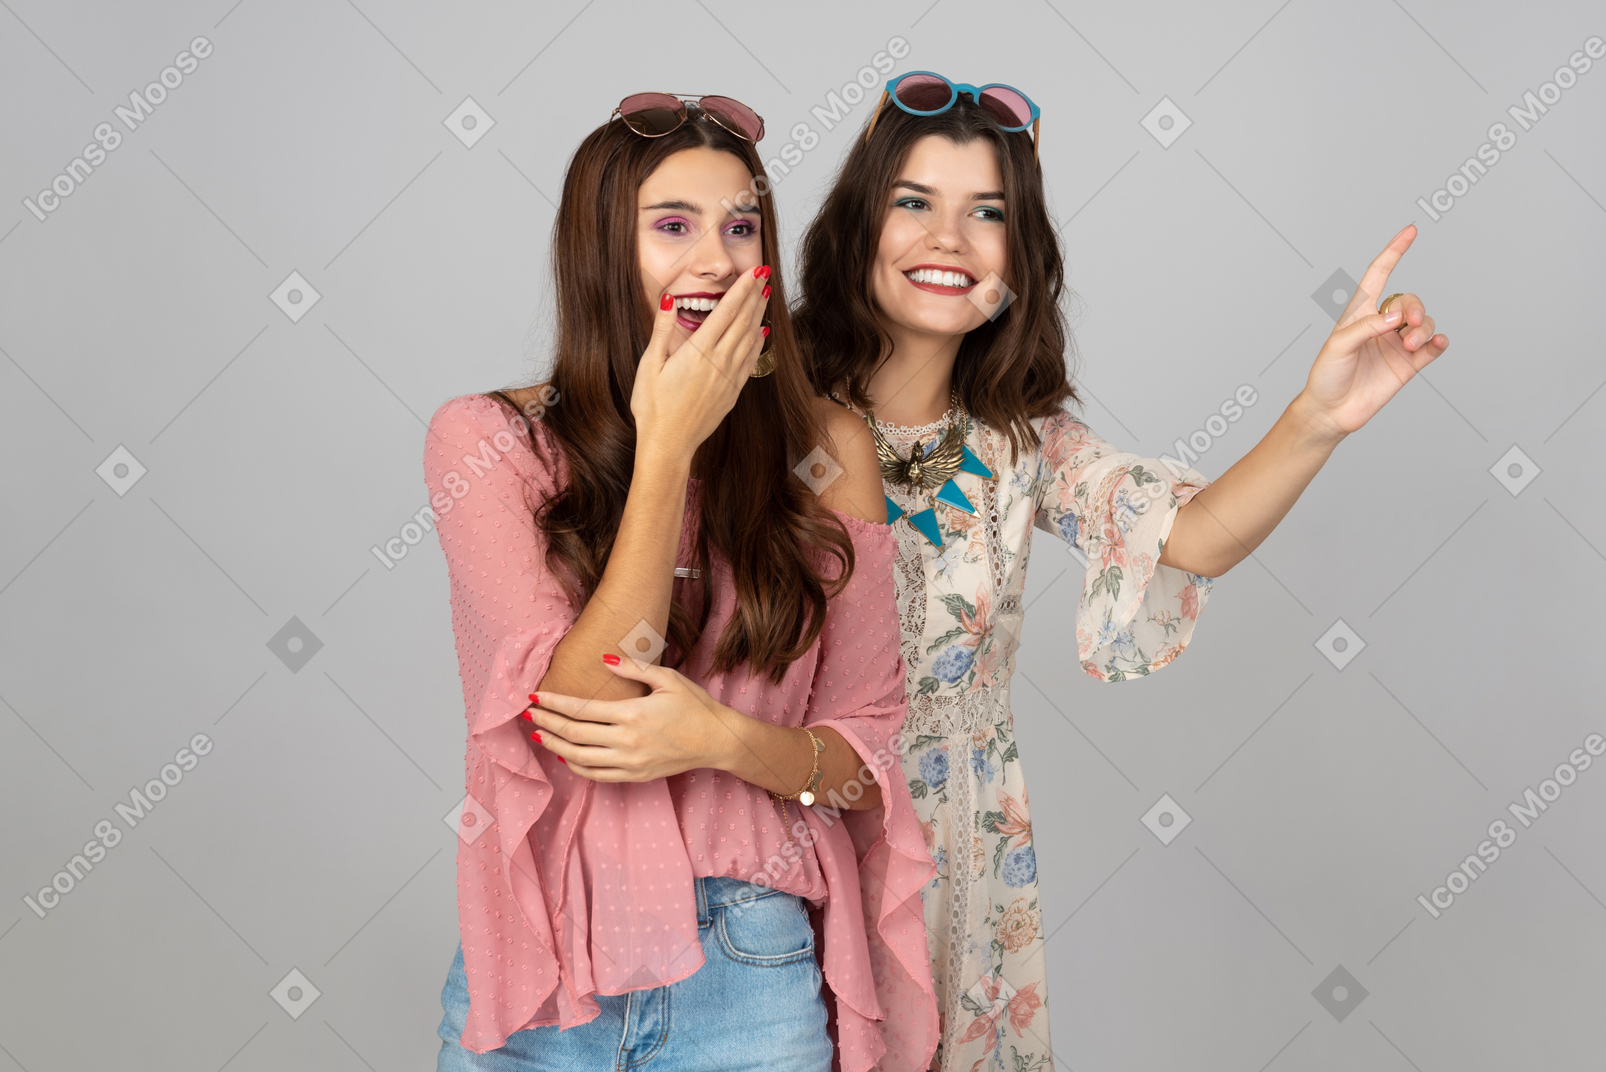 Young girlfriends having fun at a musical festival